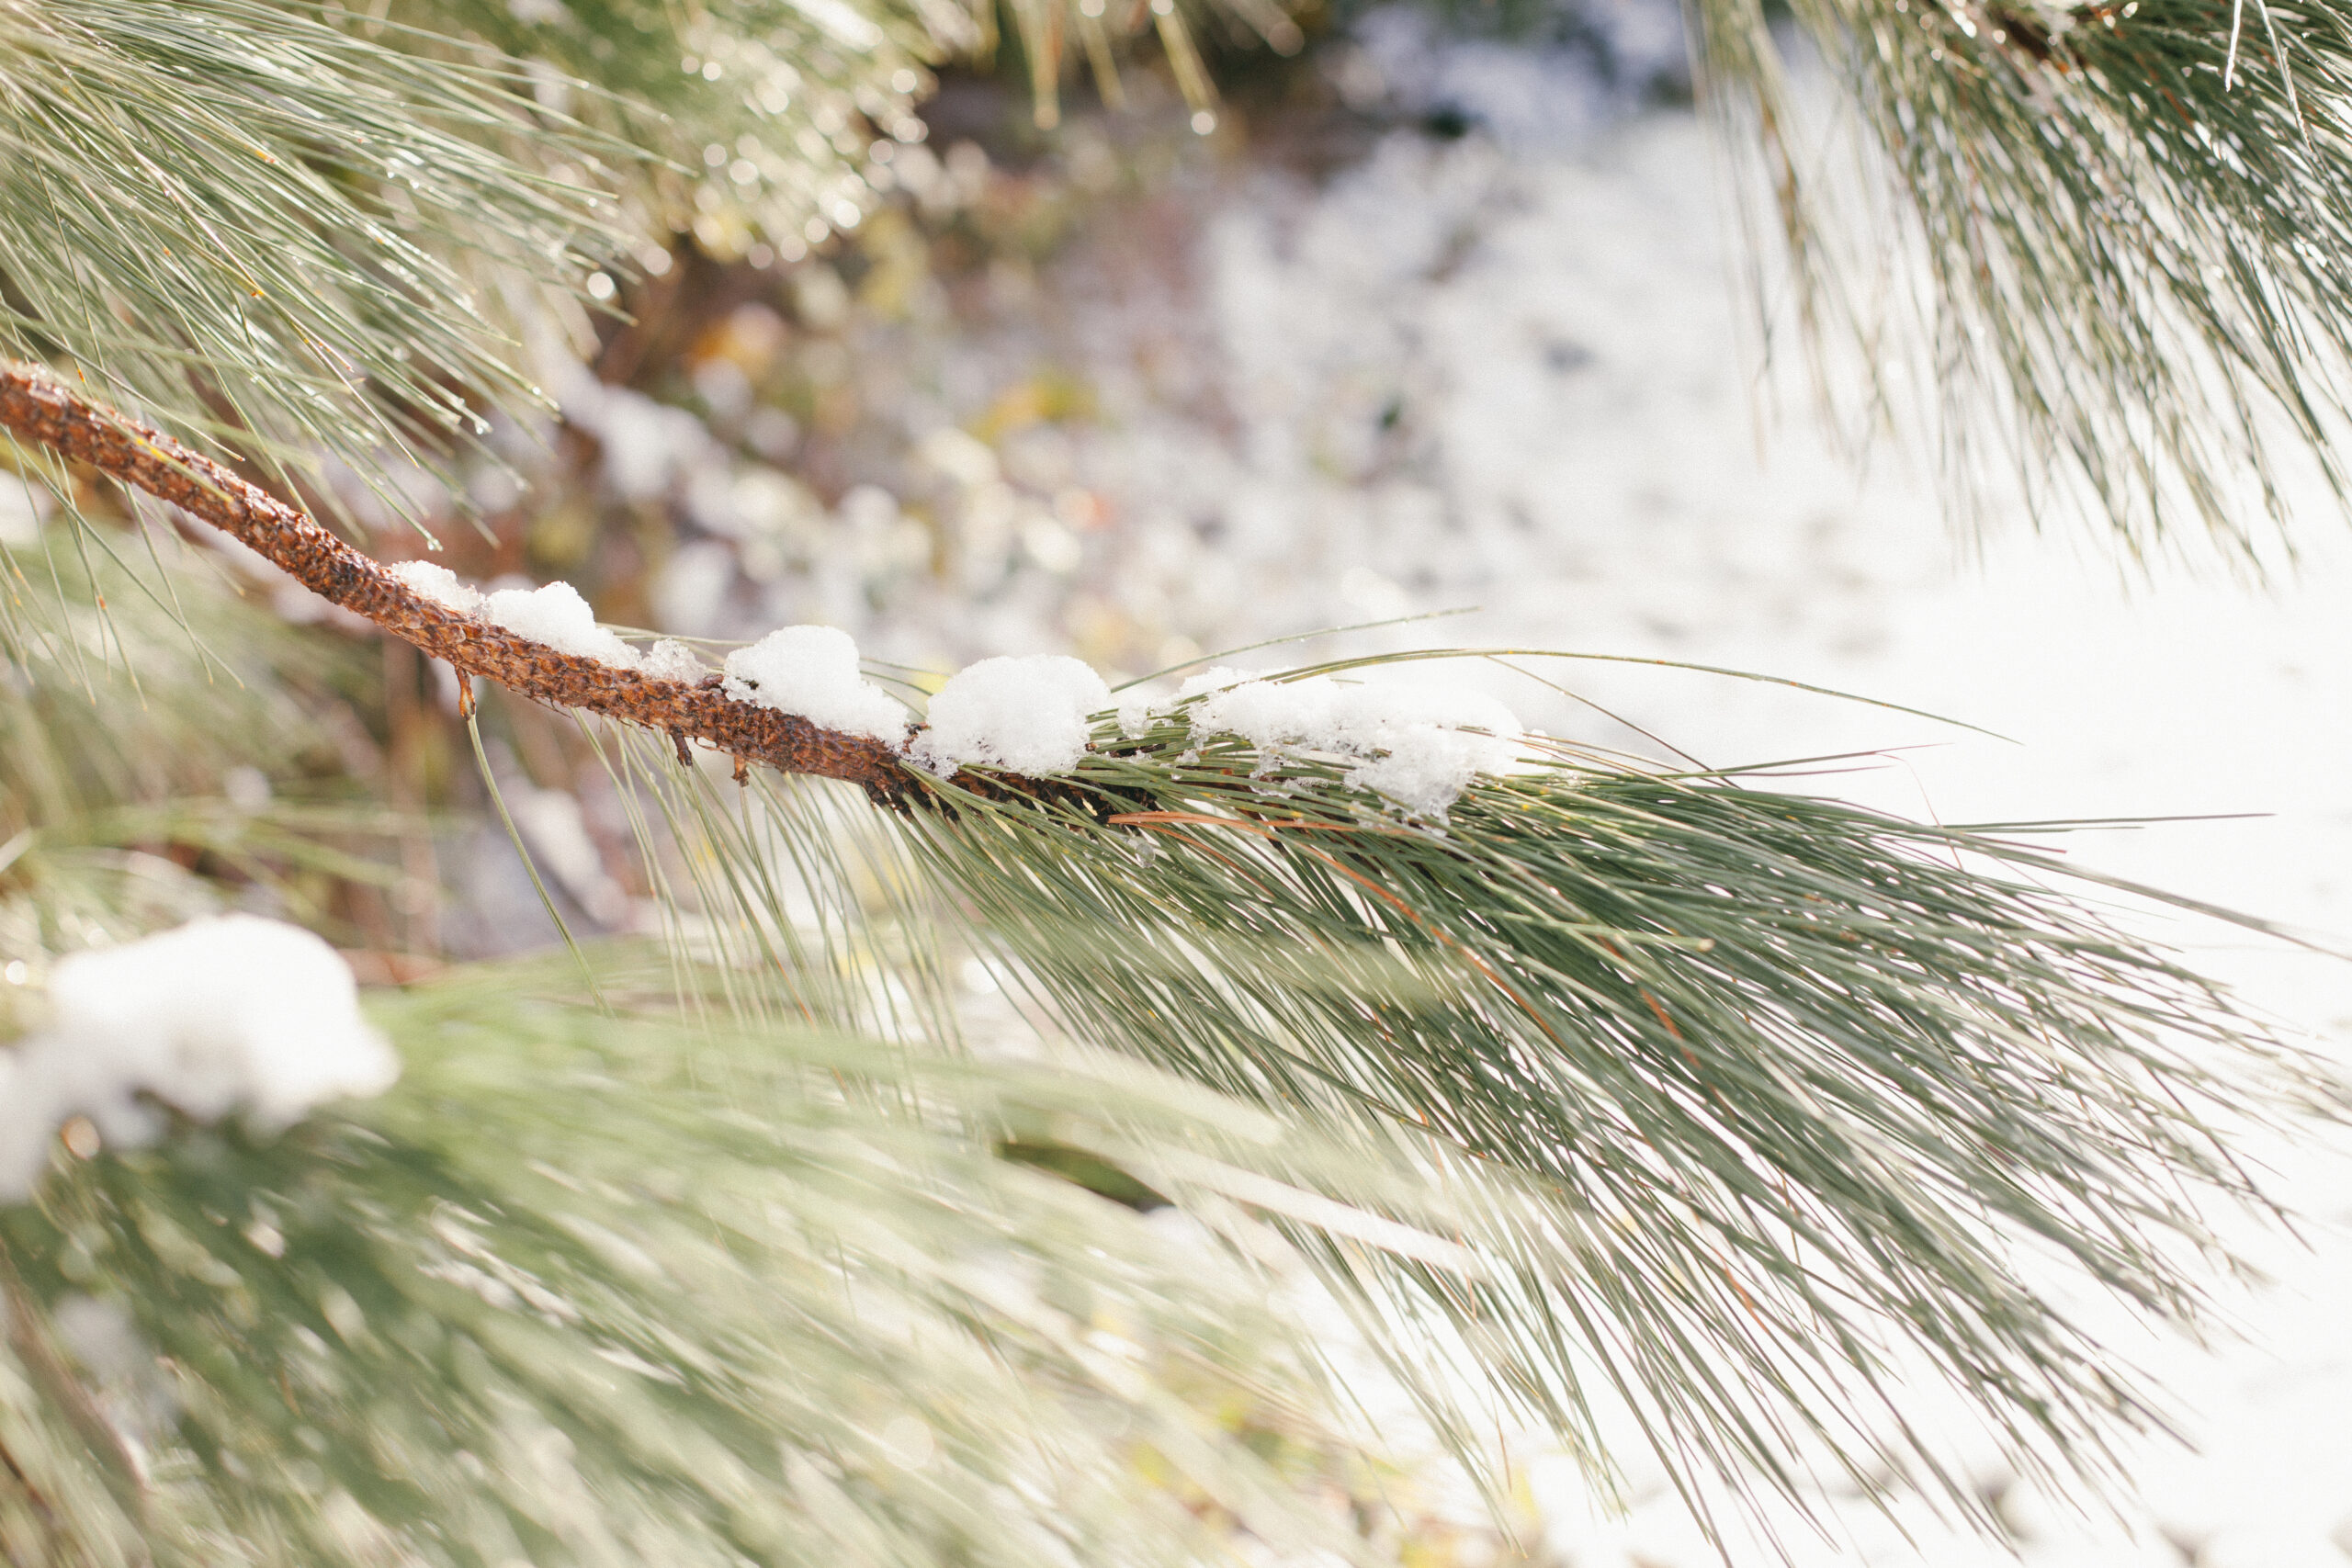 A Snowy Pine Bough blows in the wind at Potager Online